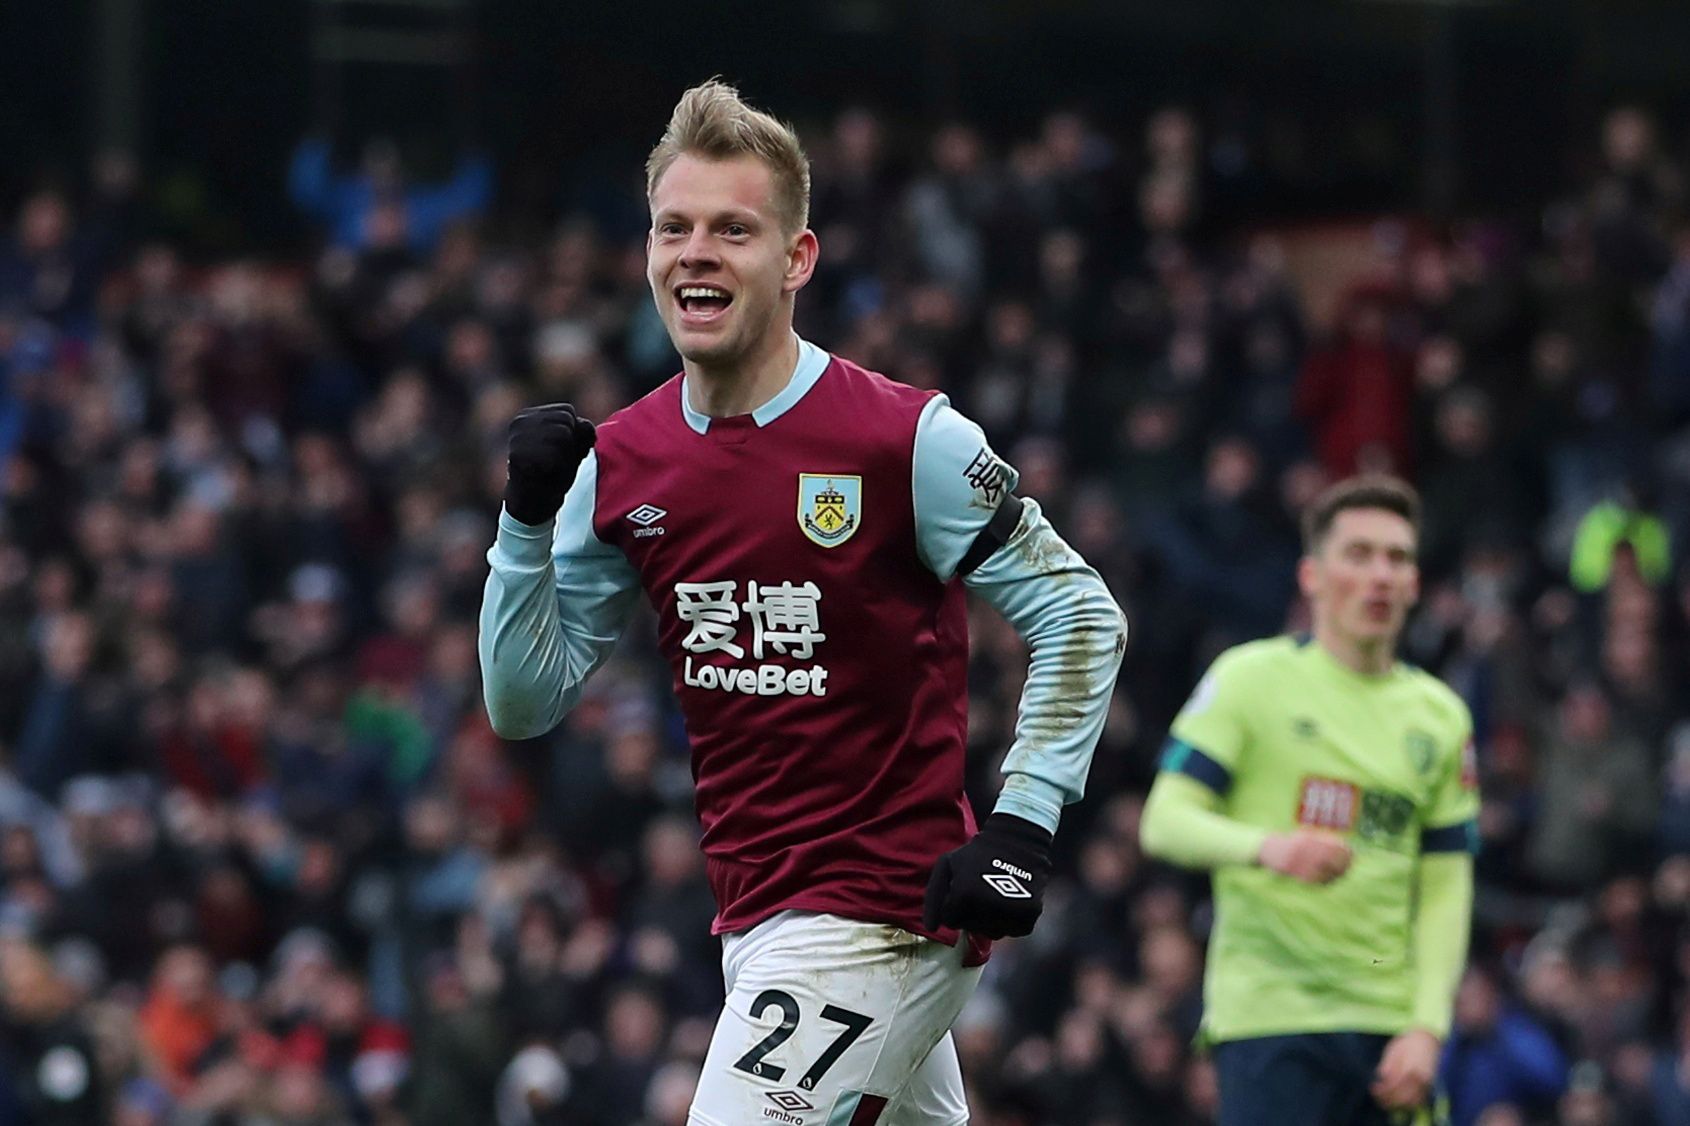 Soccer Football - Premier League - Burnley v AFC Bournemouth - Turf Moor, Burnley, Britain - February 22, 2020  Burnley's Matej Vydra celebrates scoring their first goal  Action Images via Reuters/Molly Darlington  EDITORIAL USE ONLY. No use with unauthorized audio, video, data, fixture lists, club/league logos or "live" services. Online in-match use limited to 75 images, no video emulation. No use in betting, games or single club/league/player publications.  Please contact your account represen